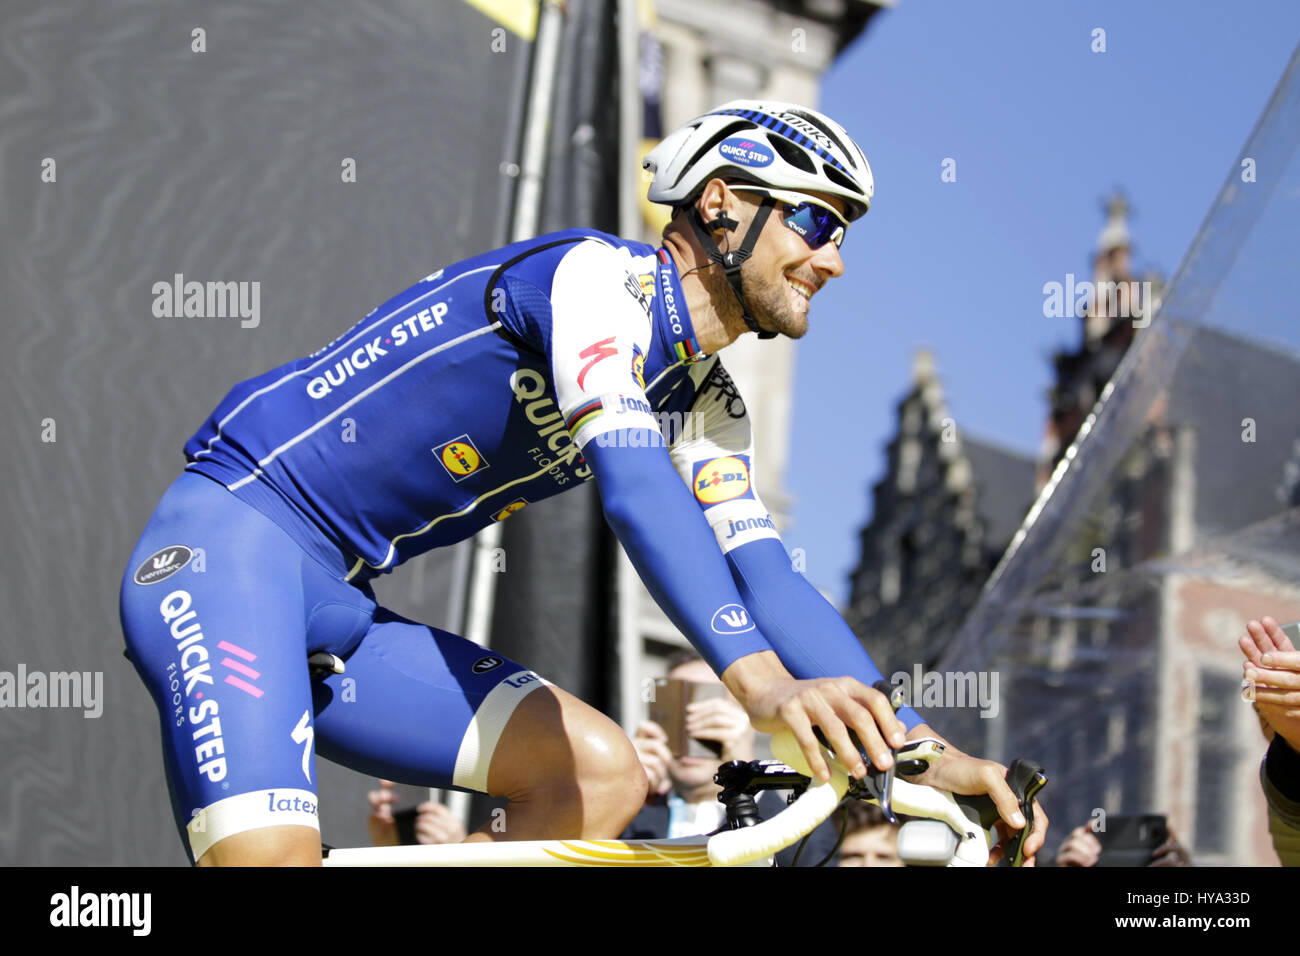 Anvers, Belgium. 02nd Apr, 2017. 02 April 2017, Antwerp, Belgium; UCI World Tour, Tom Boonen during the presentation of the teams of the Tour of Flanders 2017 Credit: Laurent Lairys/Agence Locevaphotos/Alamy Live News Stock Photo